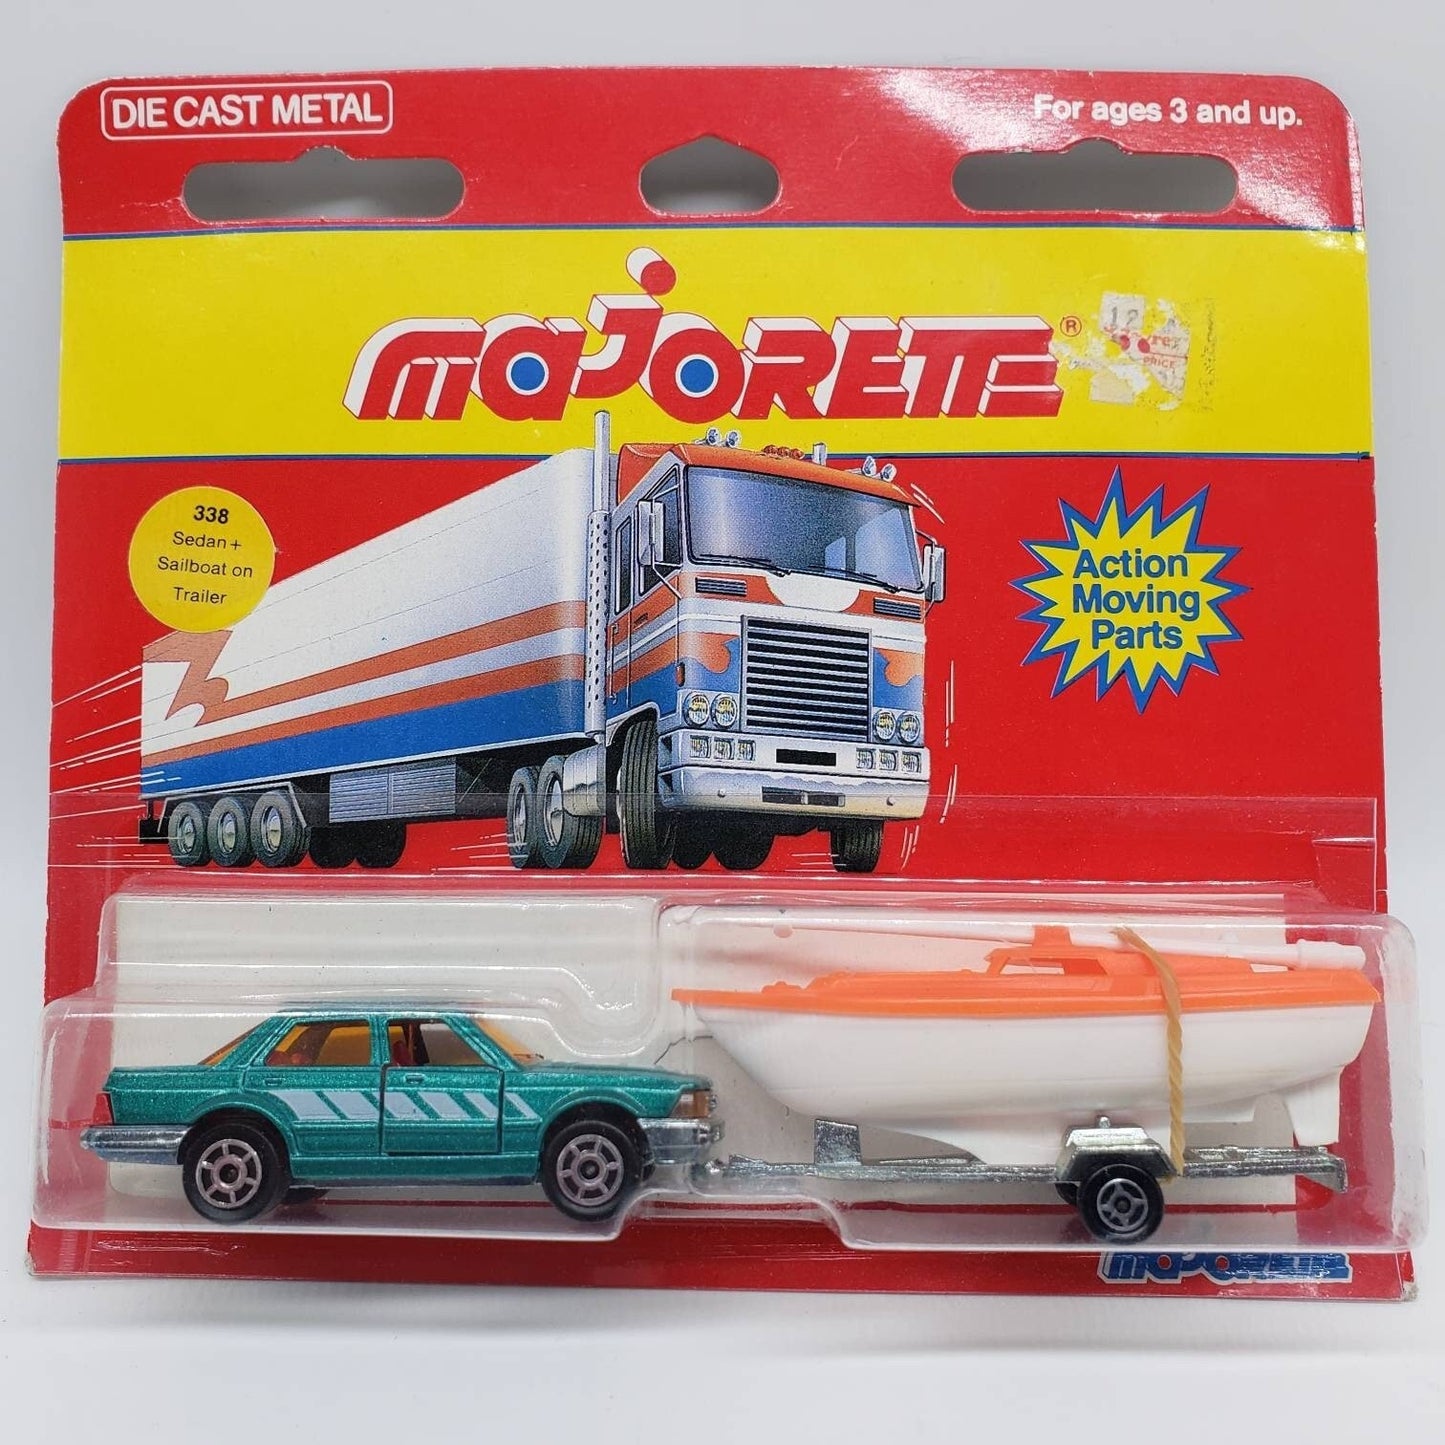 Majorette Sedan Sailboat on Trailer Green 300 Series Collectible Diecast Scale Model Miniature Toy Car Perfect Birthday Gift